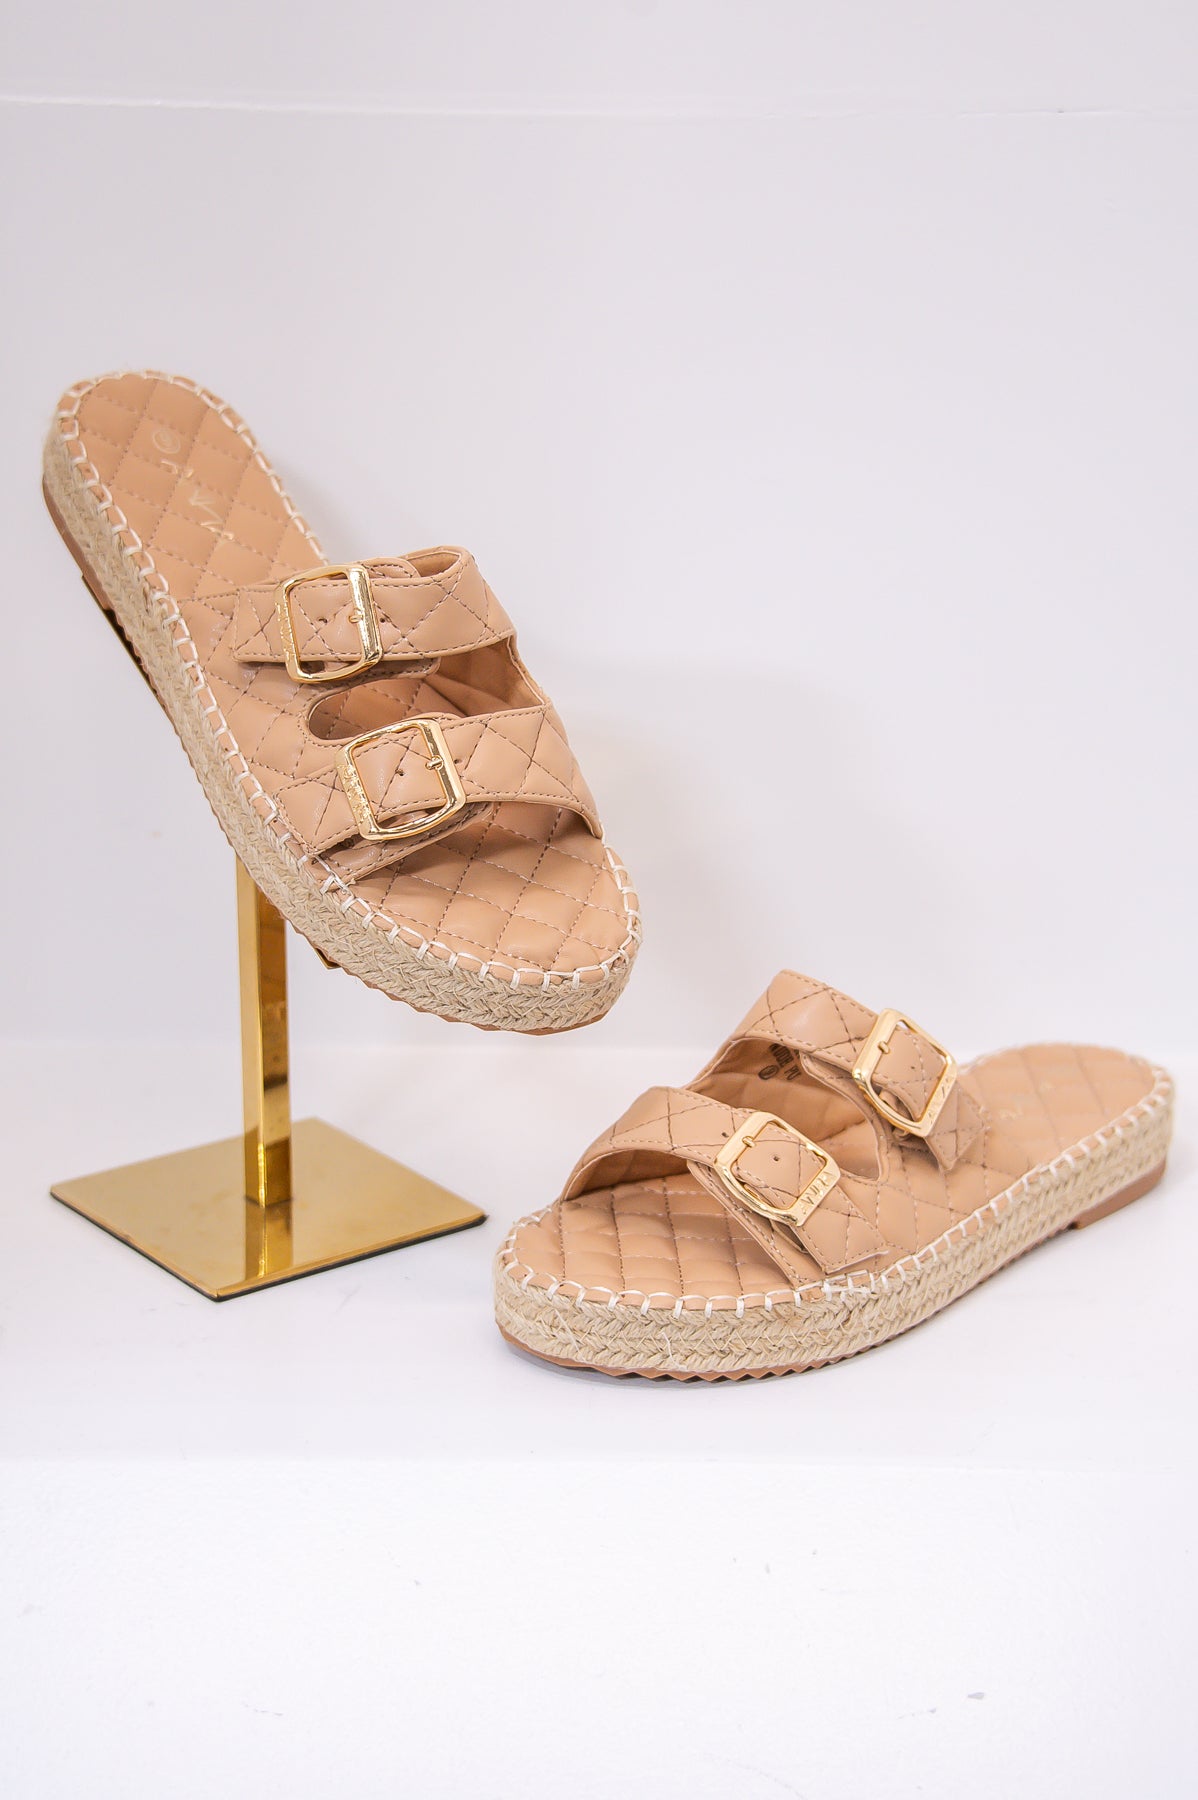 Journeys Begin With One Step Nude Quilted Sandals - SHO2670NU